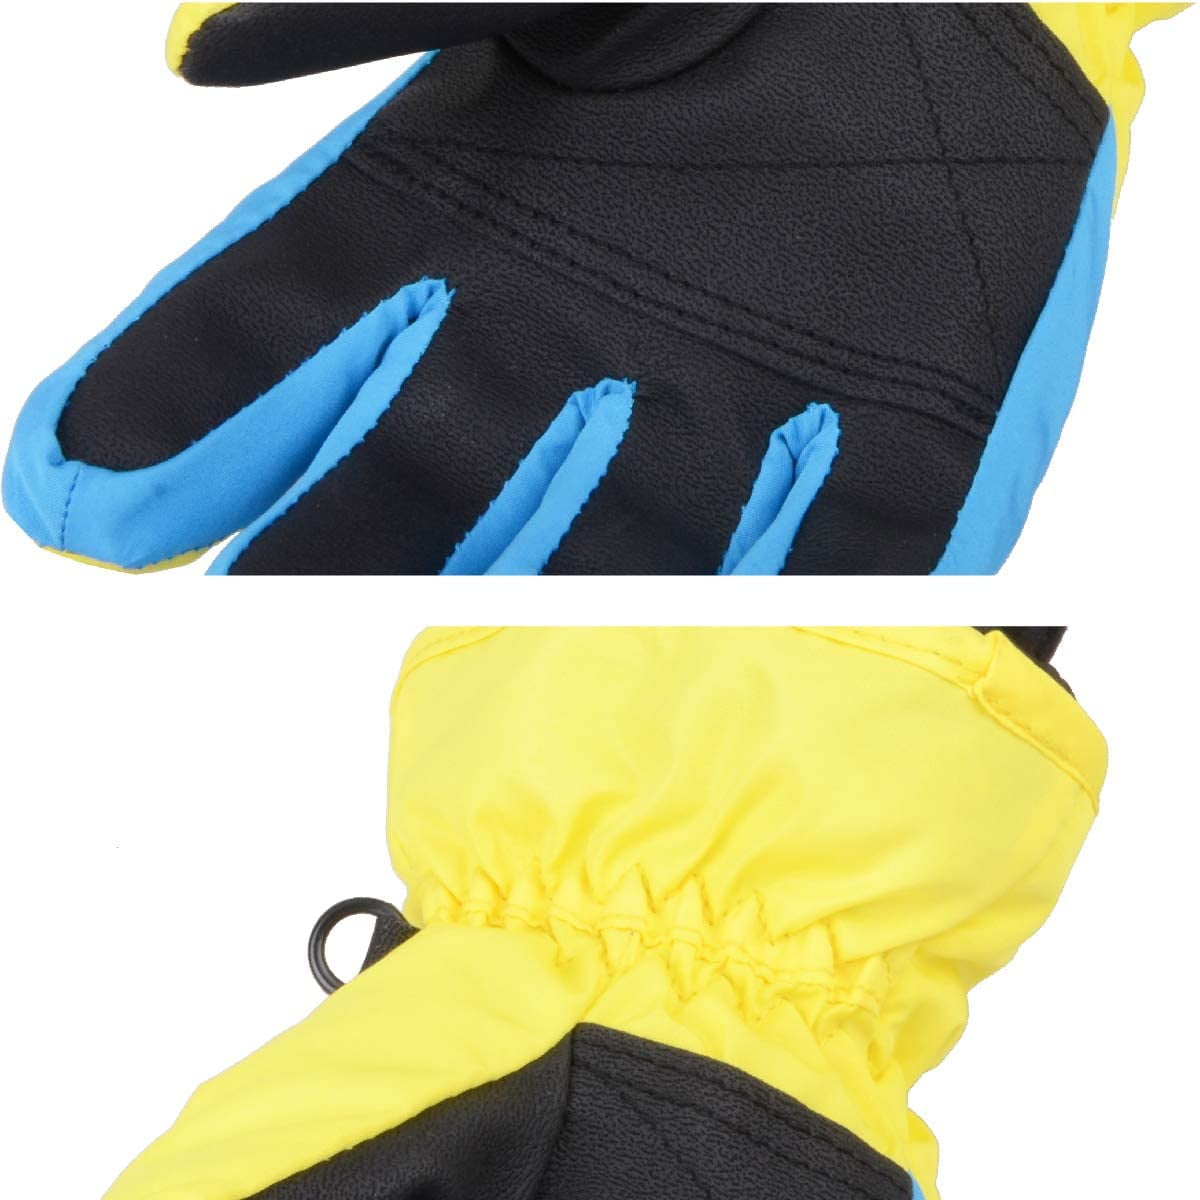 Azarxis Kids Snow Gloves Winter Ski Gloves Thermal Warm Windproof Waterproof for Children Snowboarding Sledding Cycling Skiing Riding with Adjustable Cuffs 